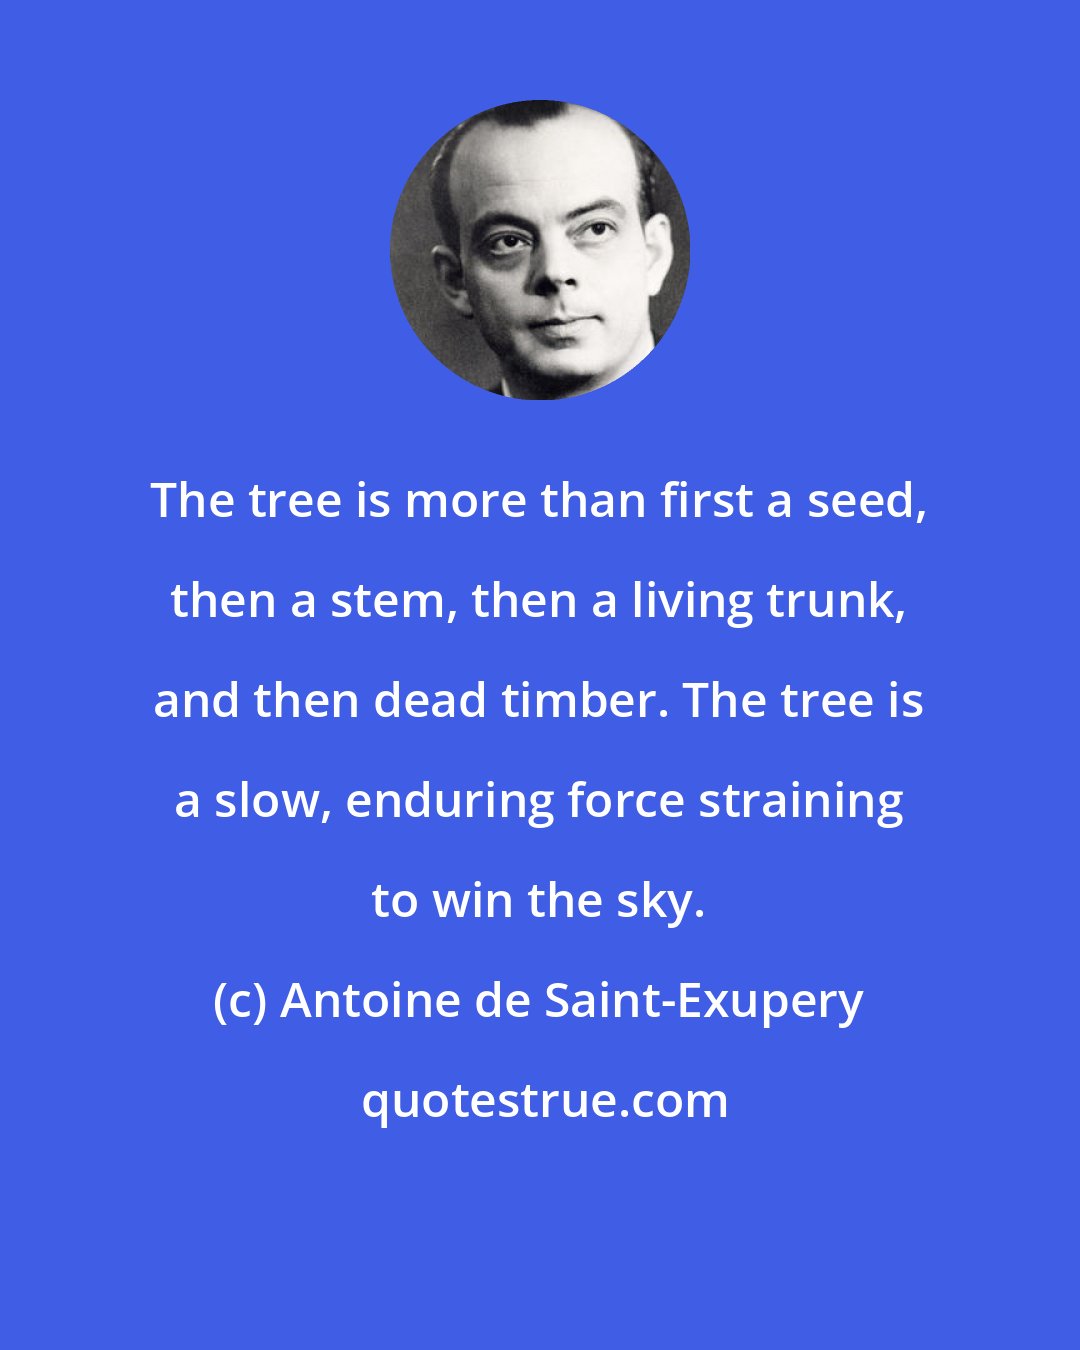 Antoine de Saint-Exupery: The tree is more than first a seed, then a stem, then a living trunk, and then dead timber. The tree is a slow, enduring force straining to win the sky.